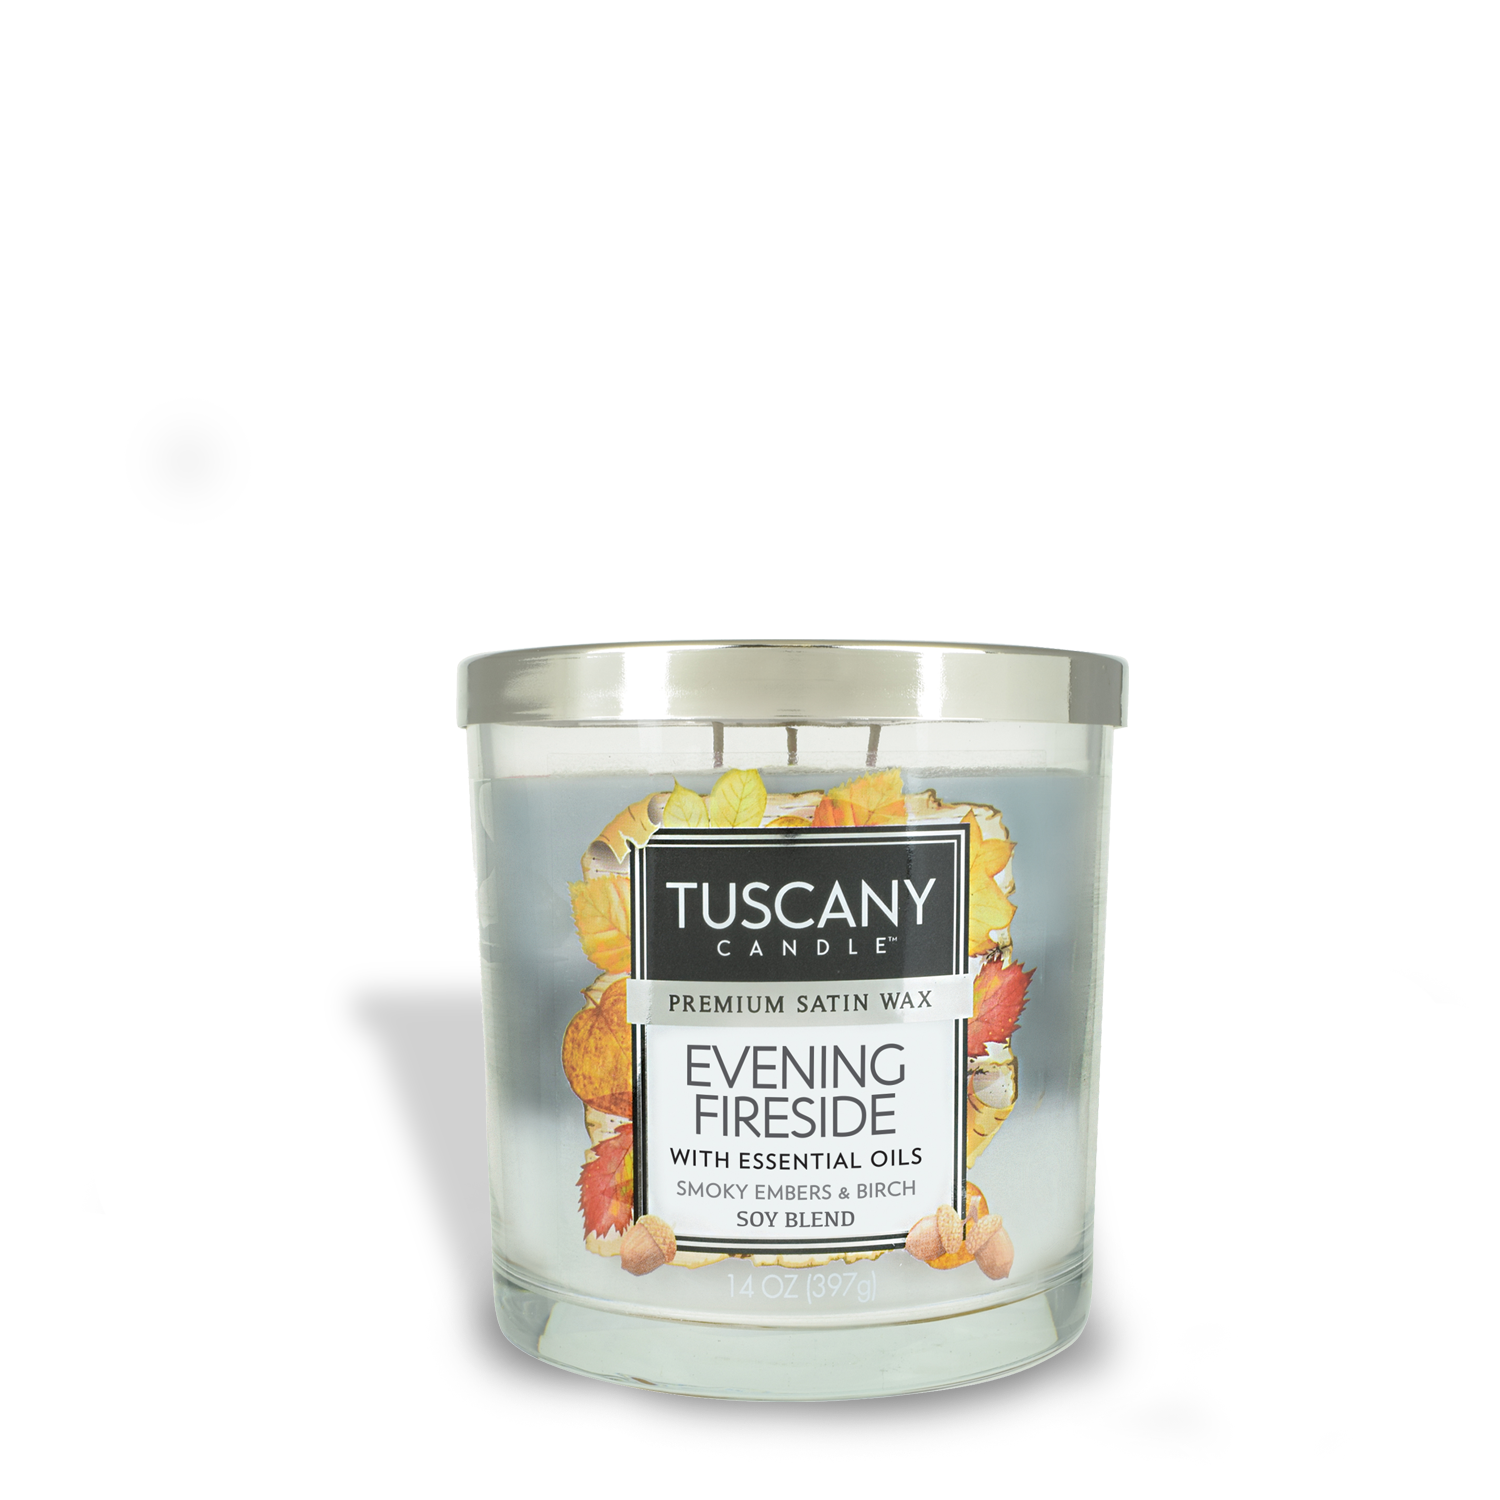 Triple-poured Evening Fireside scented candle with a woodsy fragrance. (Tuscany Candle)